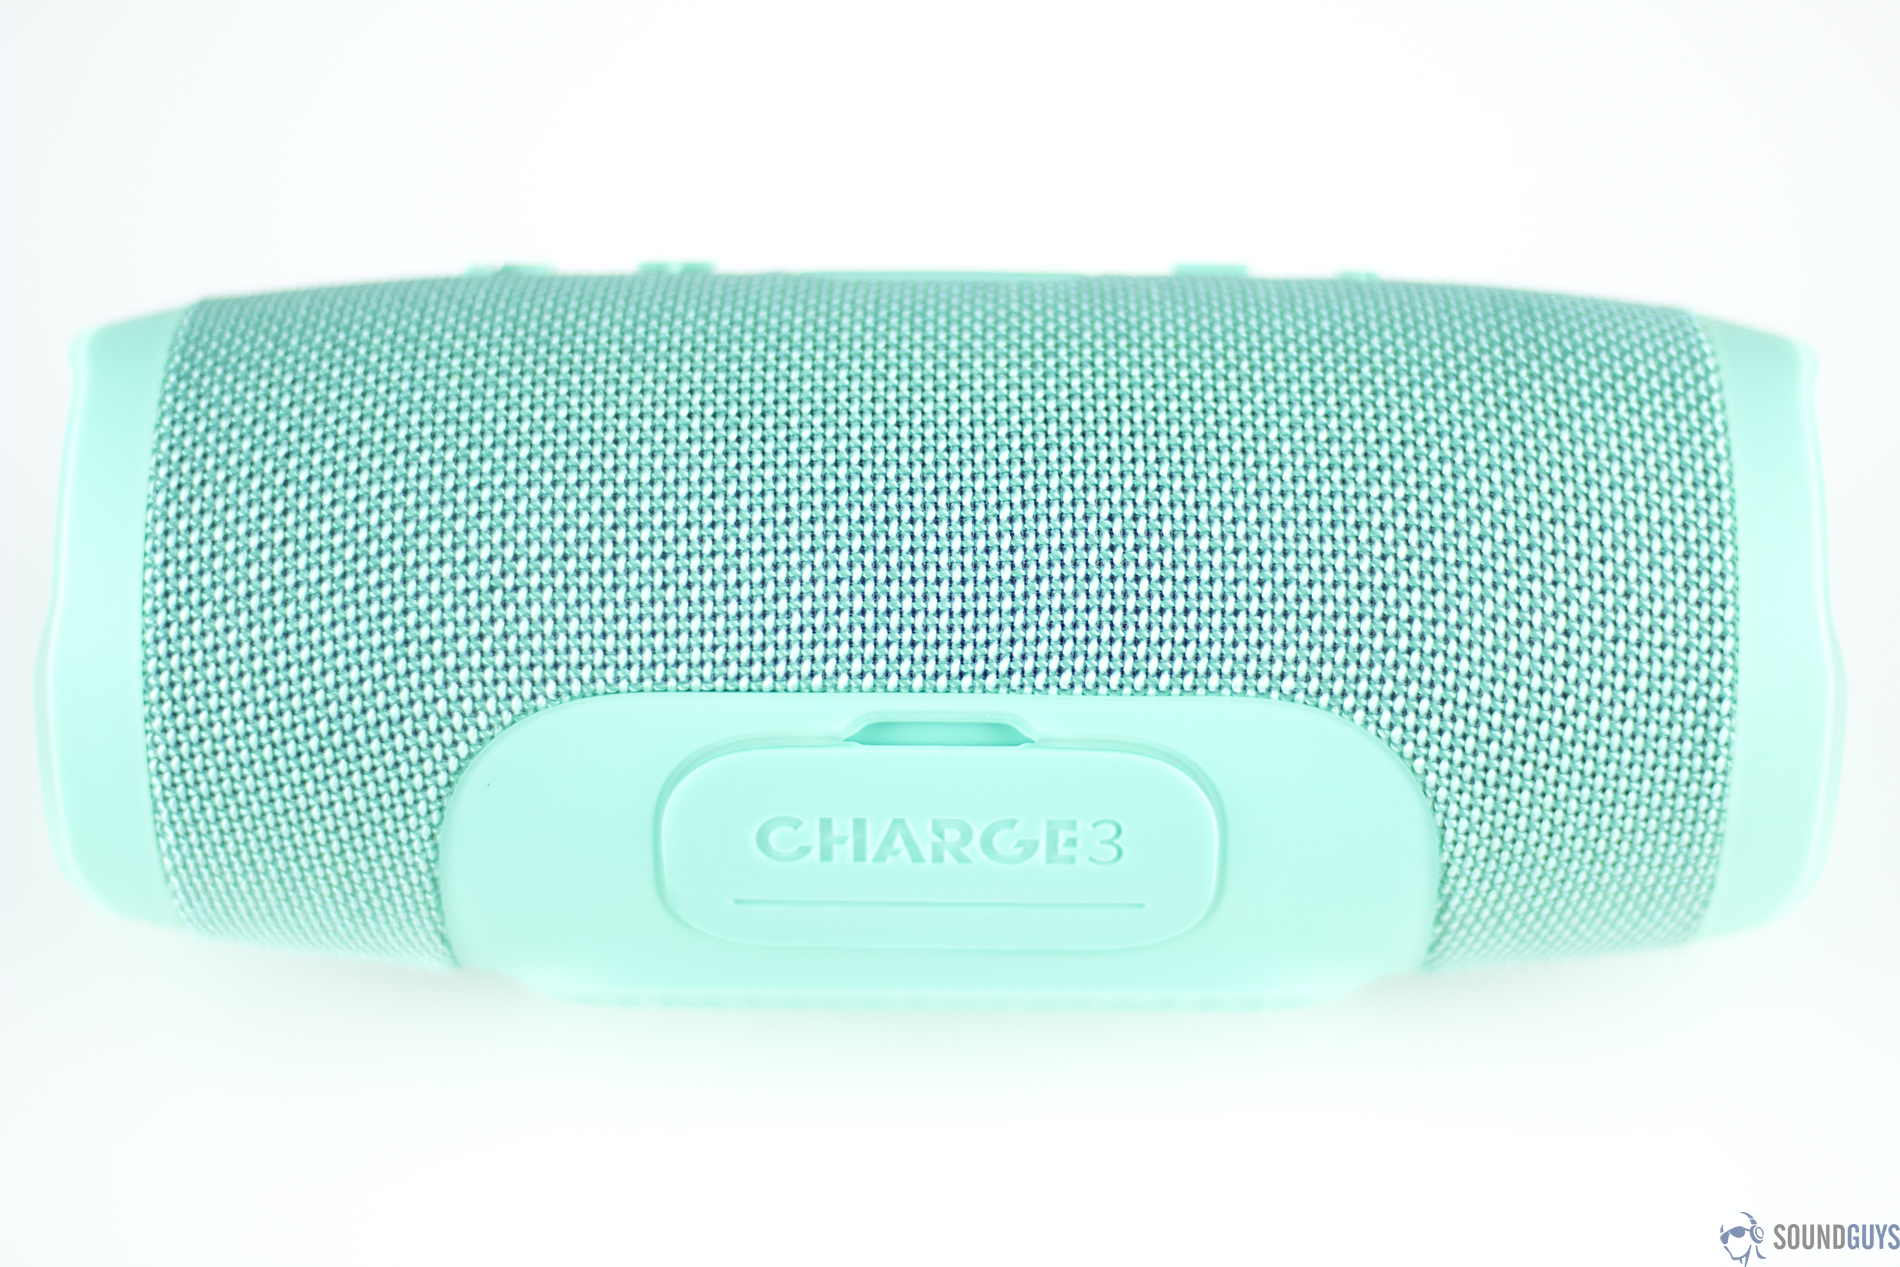 The teal JBL Charge 3 Bluetooth speaker on its side showing the flap protecting the ports.